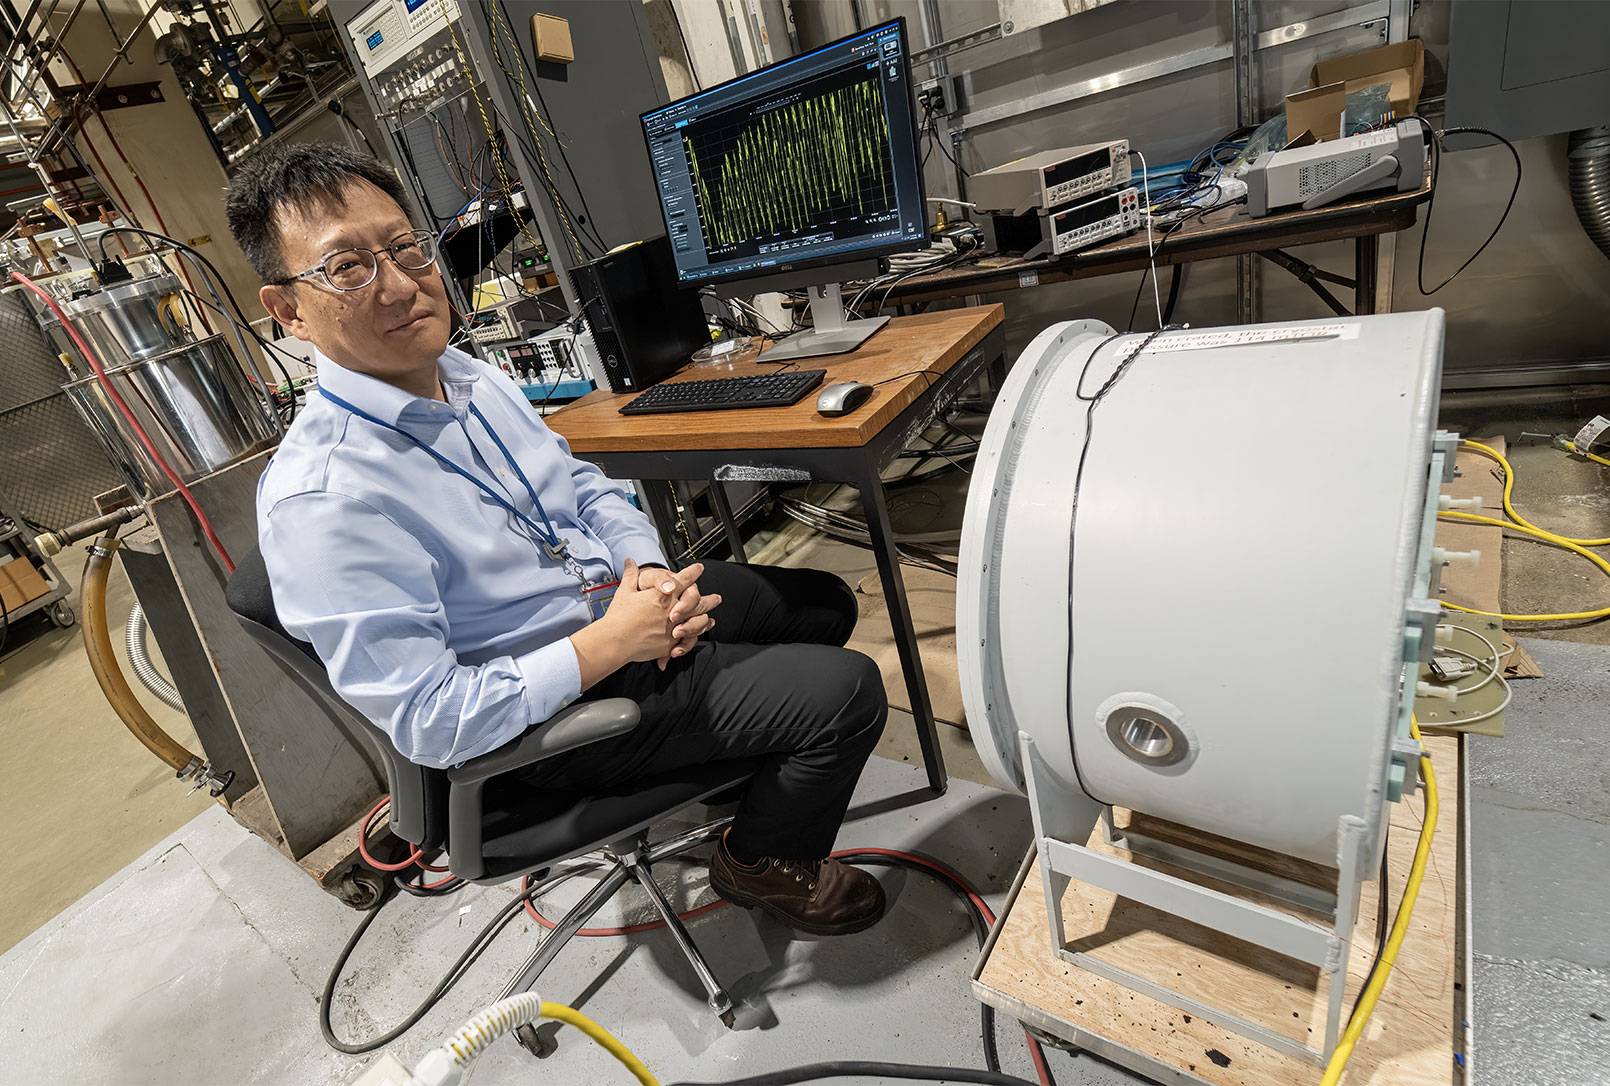 Yuhu Zhai in his lab surrounded by equipment